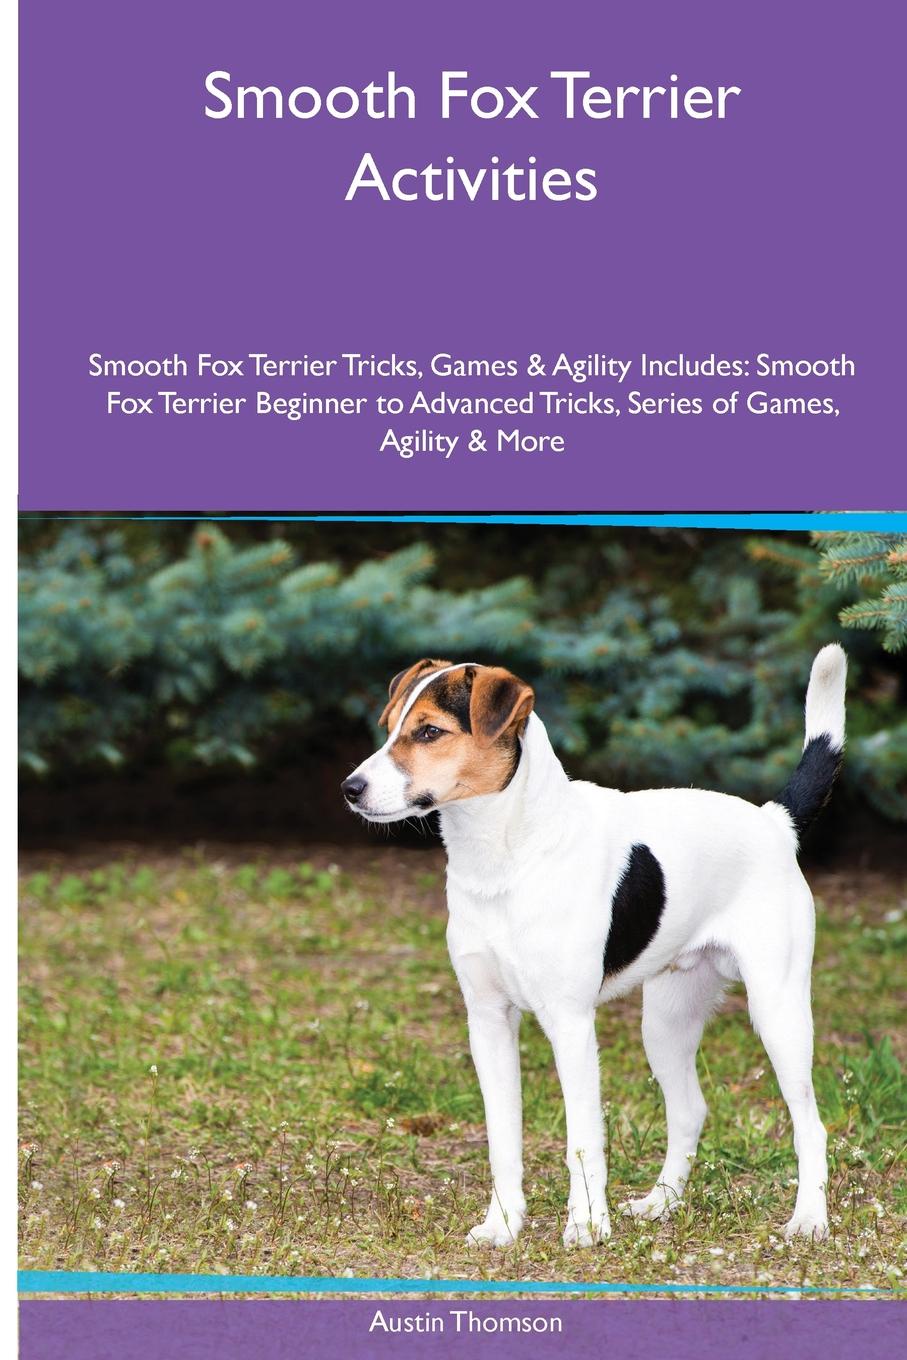 Smooth Fox Terrier  Activities Smooth Fox Terrier Tricks, Games & Agility. Includes. Smooth Fox Terrier Beginner to Advanced Tricks, Series of Games, Agility and More